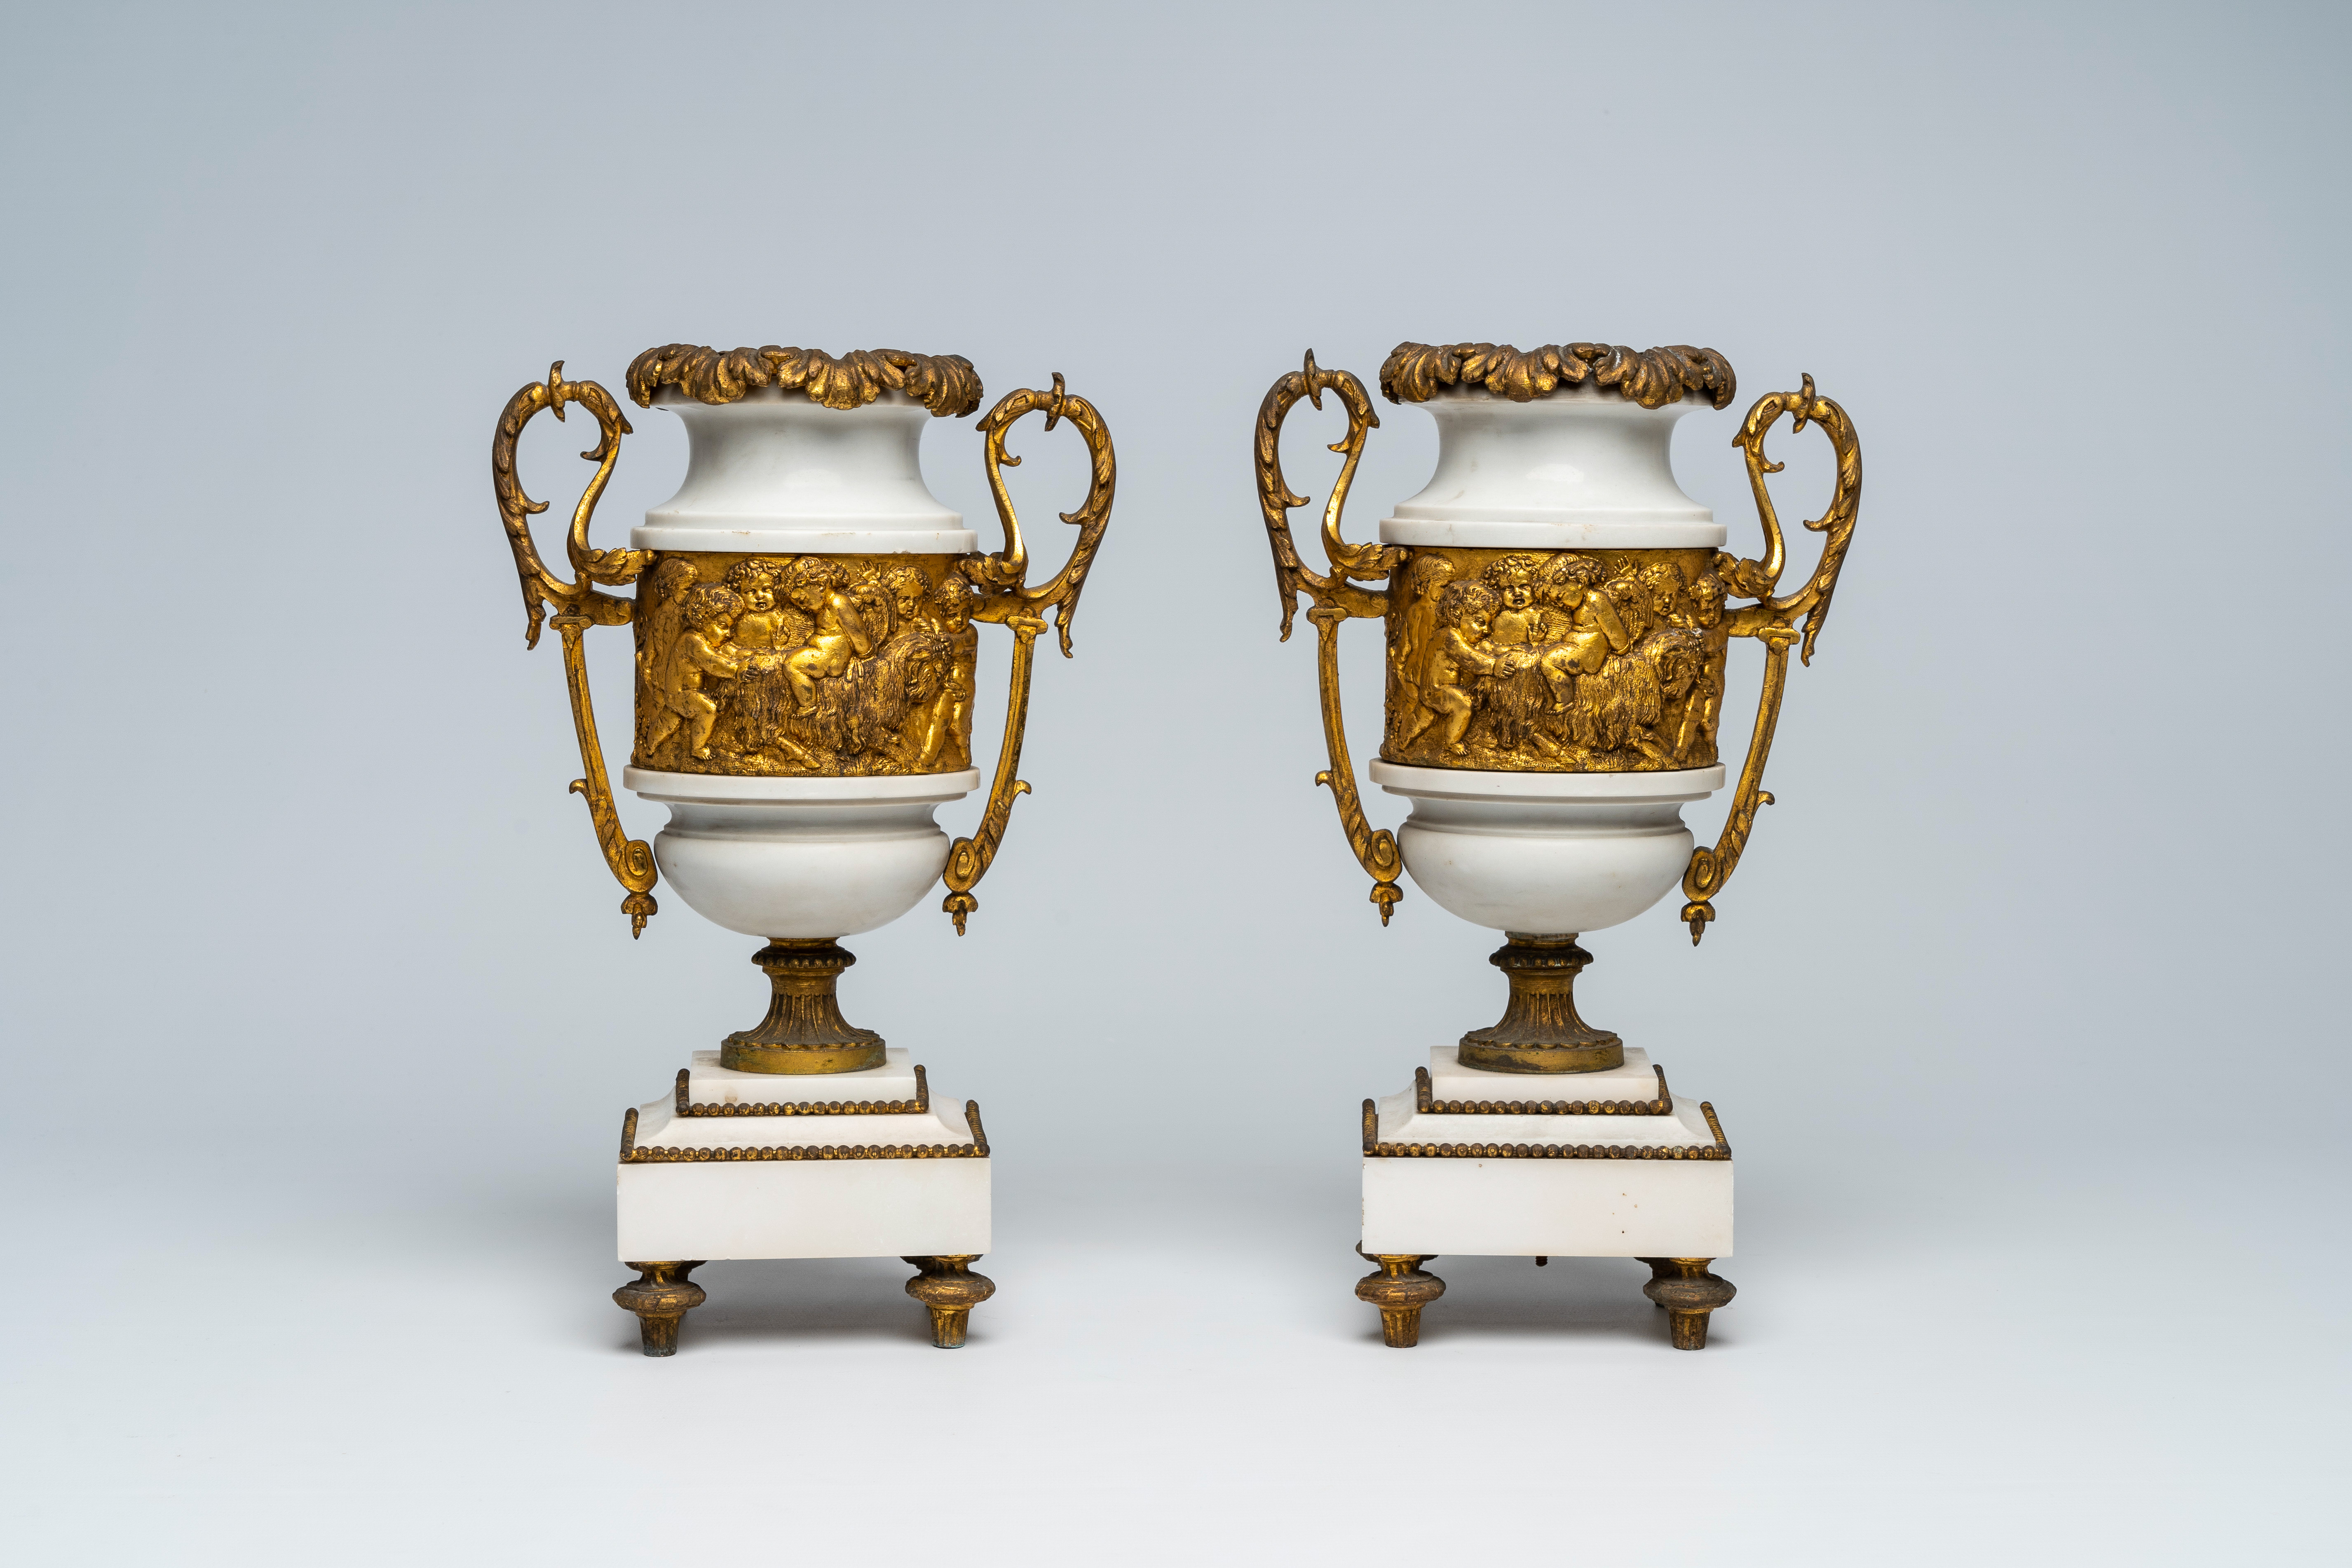 A pair of French gilt mounted white marble vases with relief design of putti, goats and Bacchus them